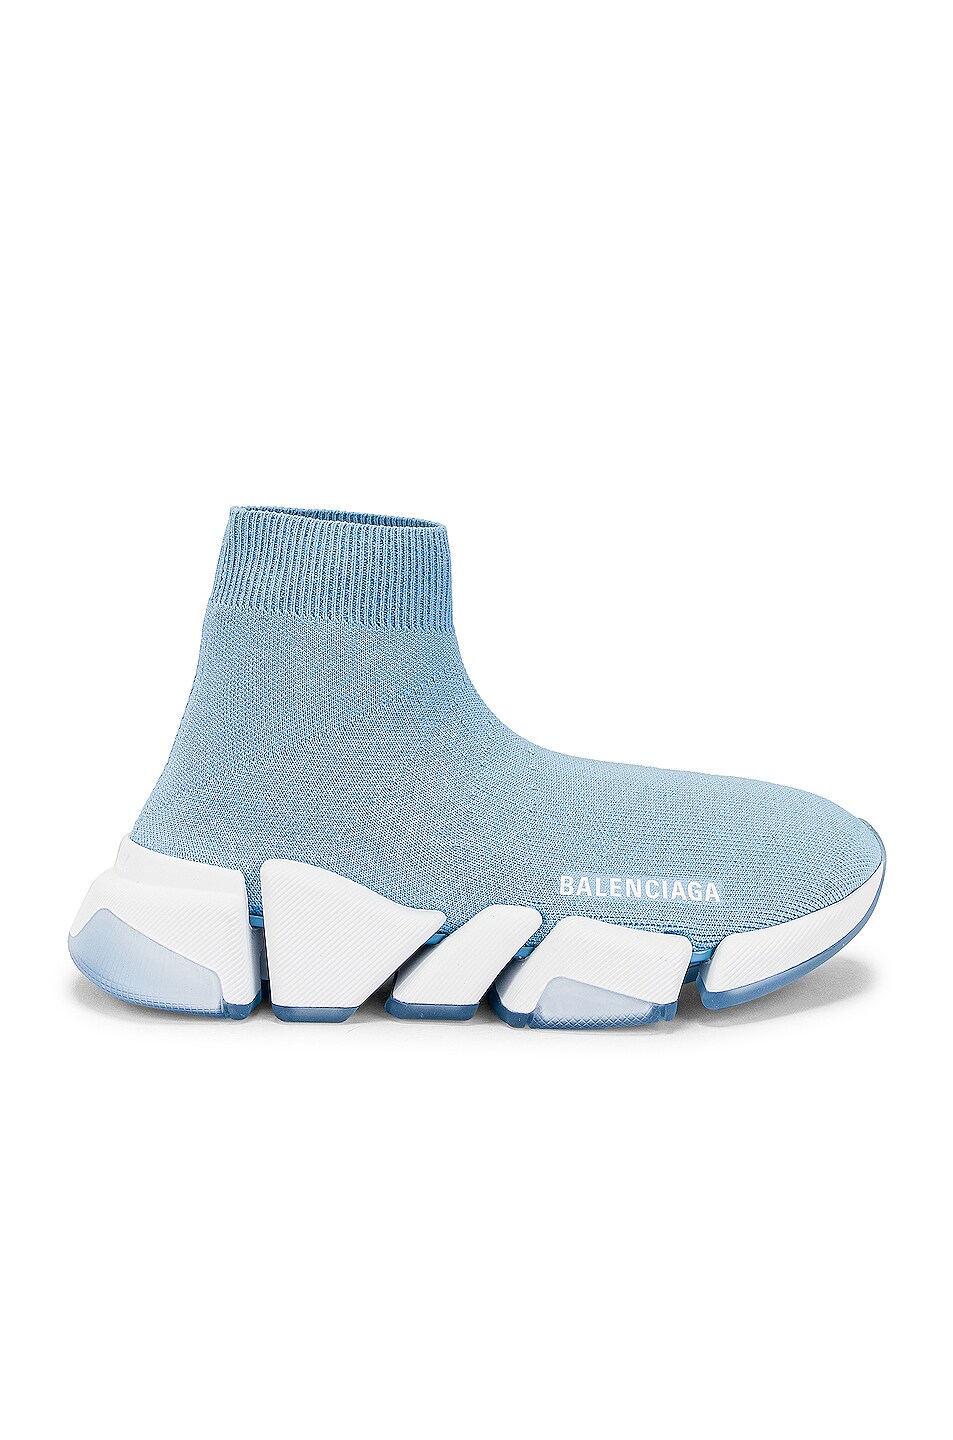 Image 1 of Balenciaga Speed 2.0 LT Sneakers in Blue & White